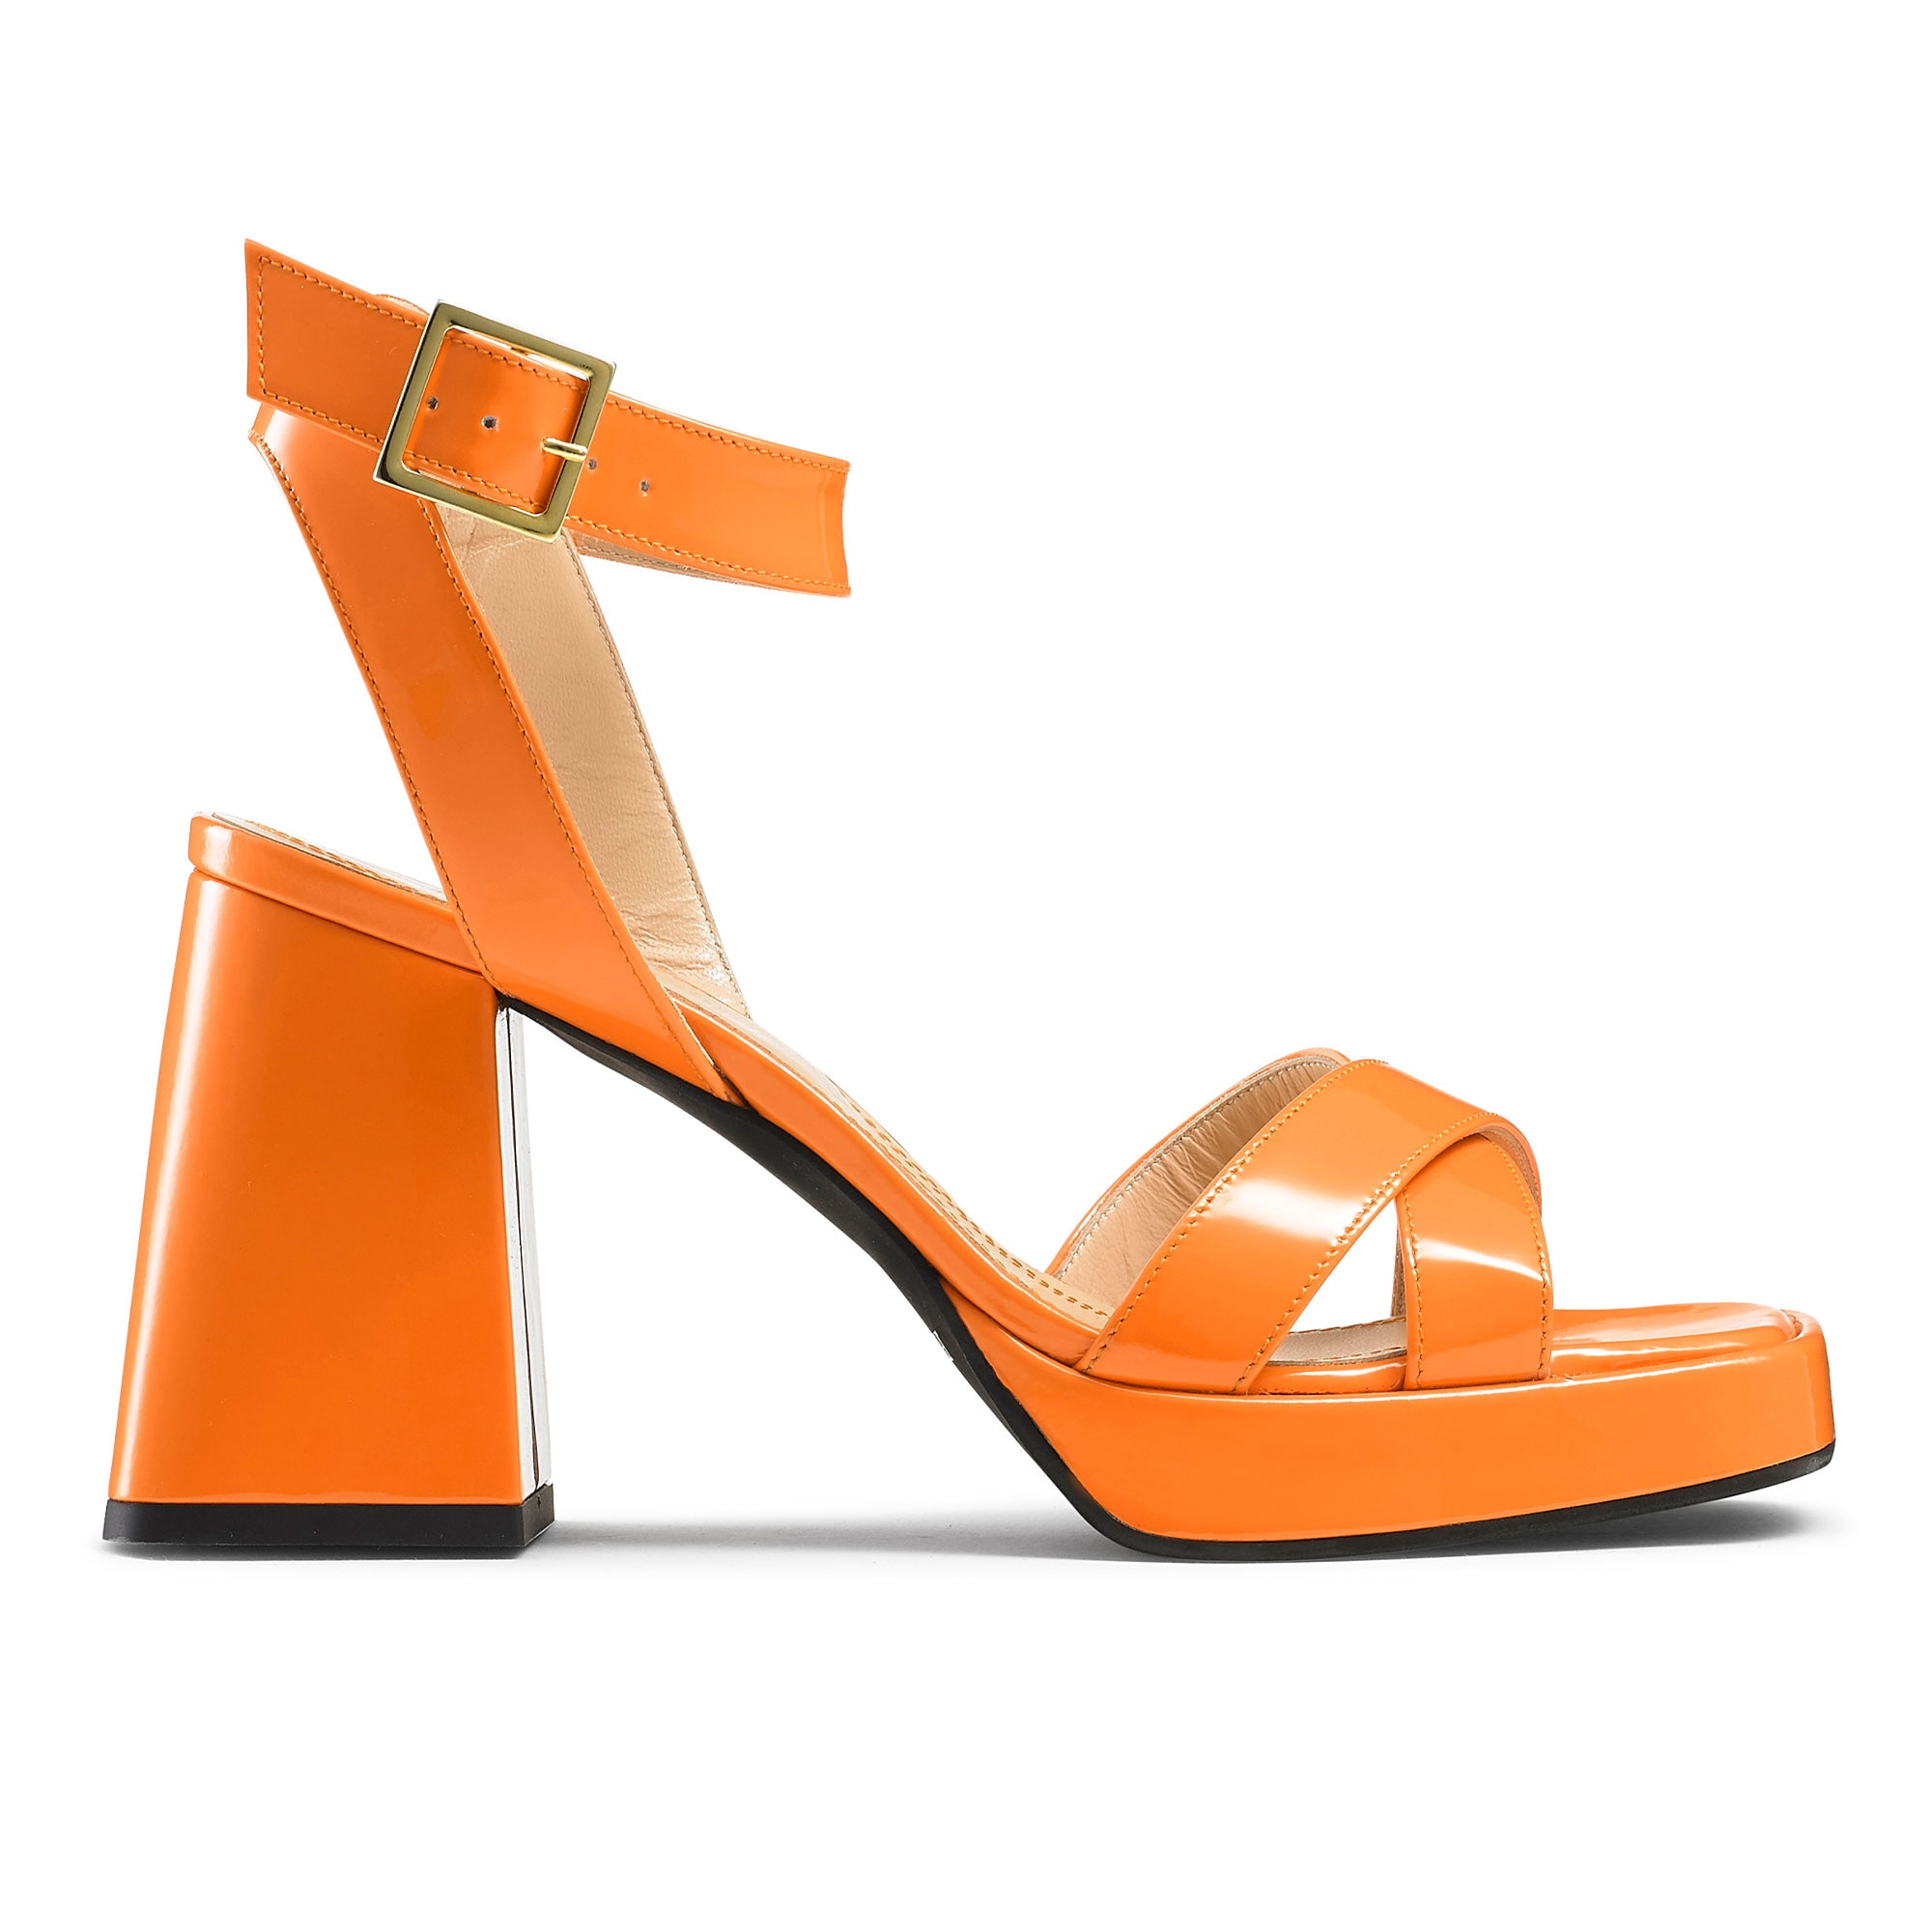 Russell and Bromley Groovybaby platform sandals in orange